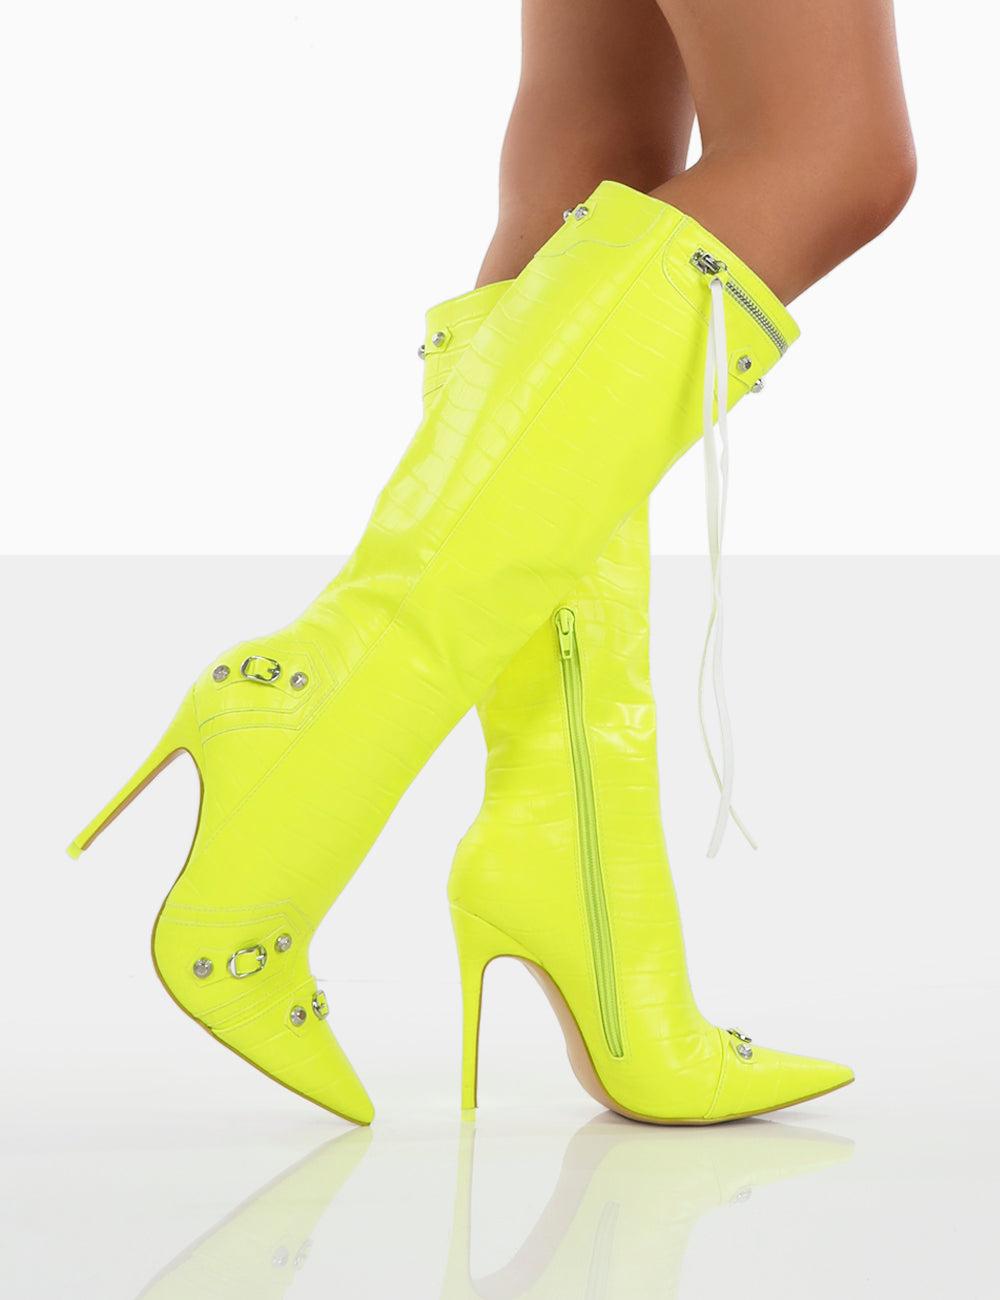 Womens Yellow Ankle Boots With Sexy Zalando High Heels And Patterned Stubby  Design Open Toes For Dress And Everyday Wear Style #230720 From Gou03,  $30.65 | DHgate.Com